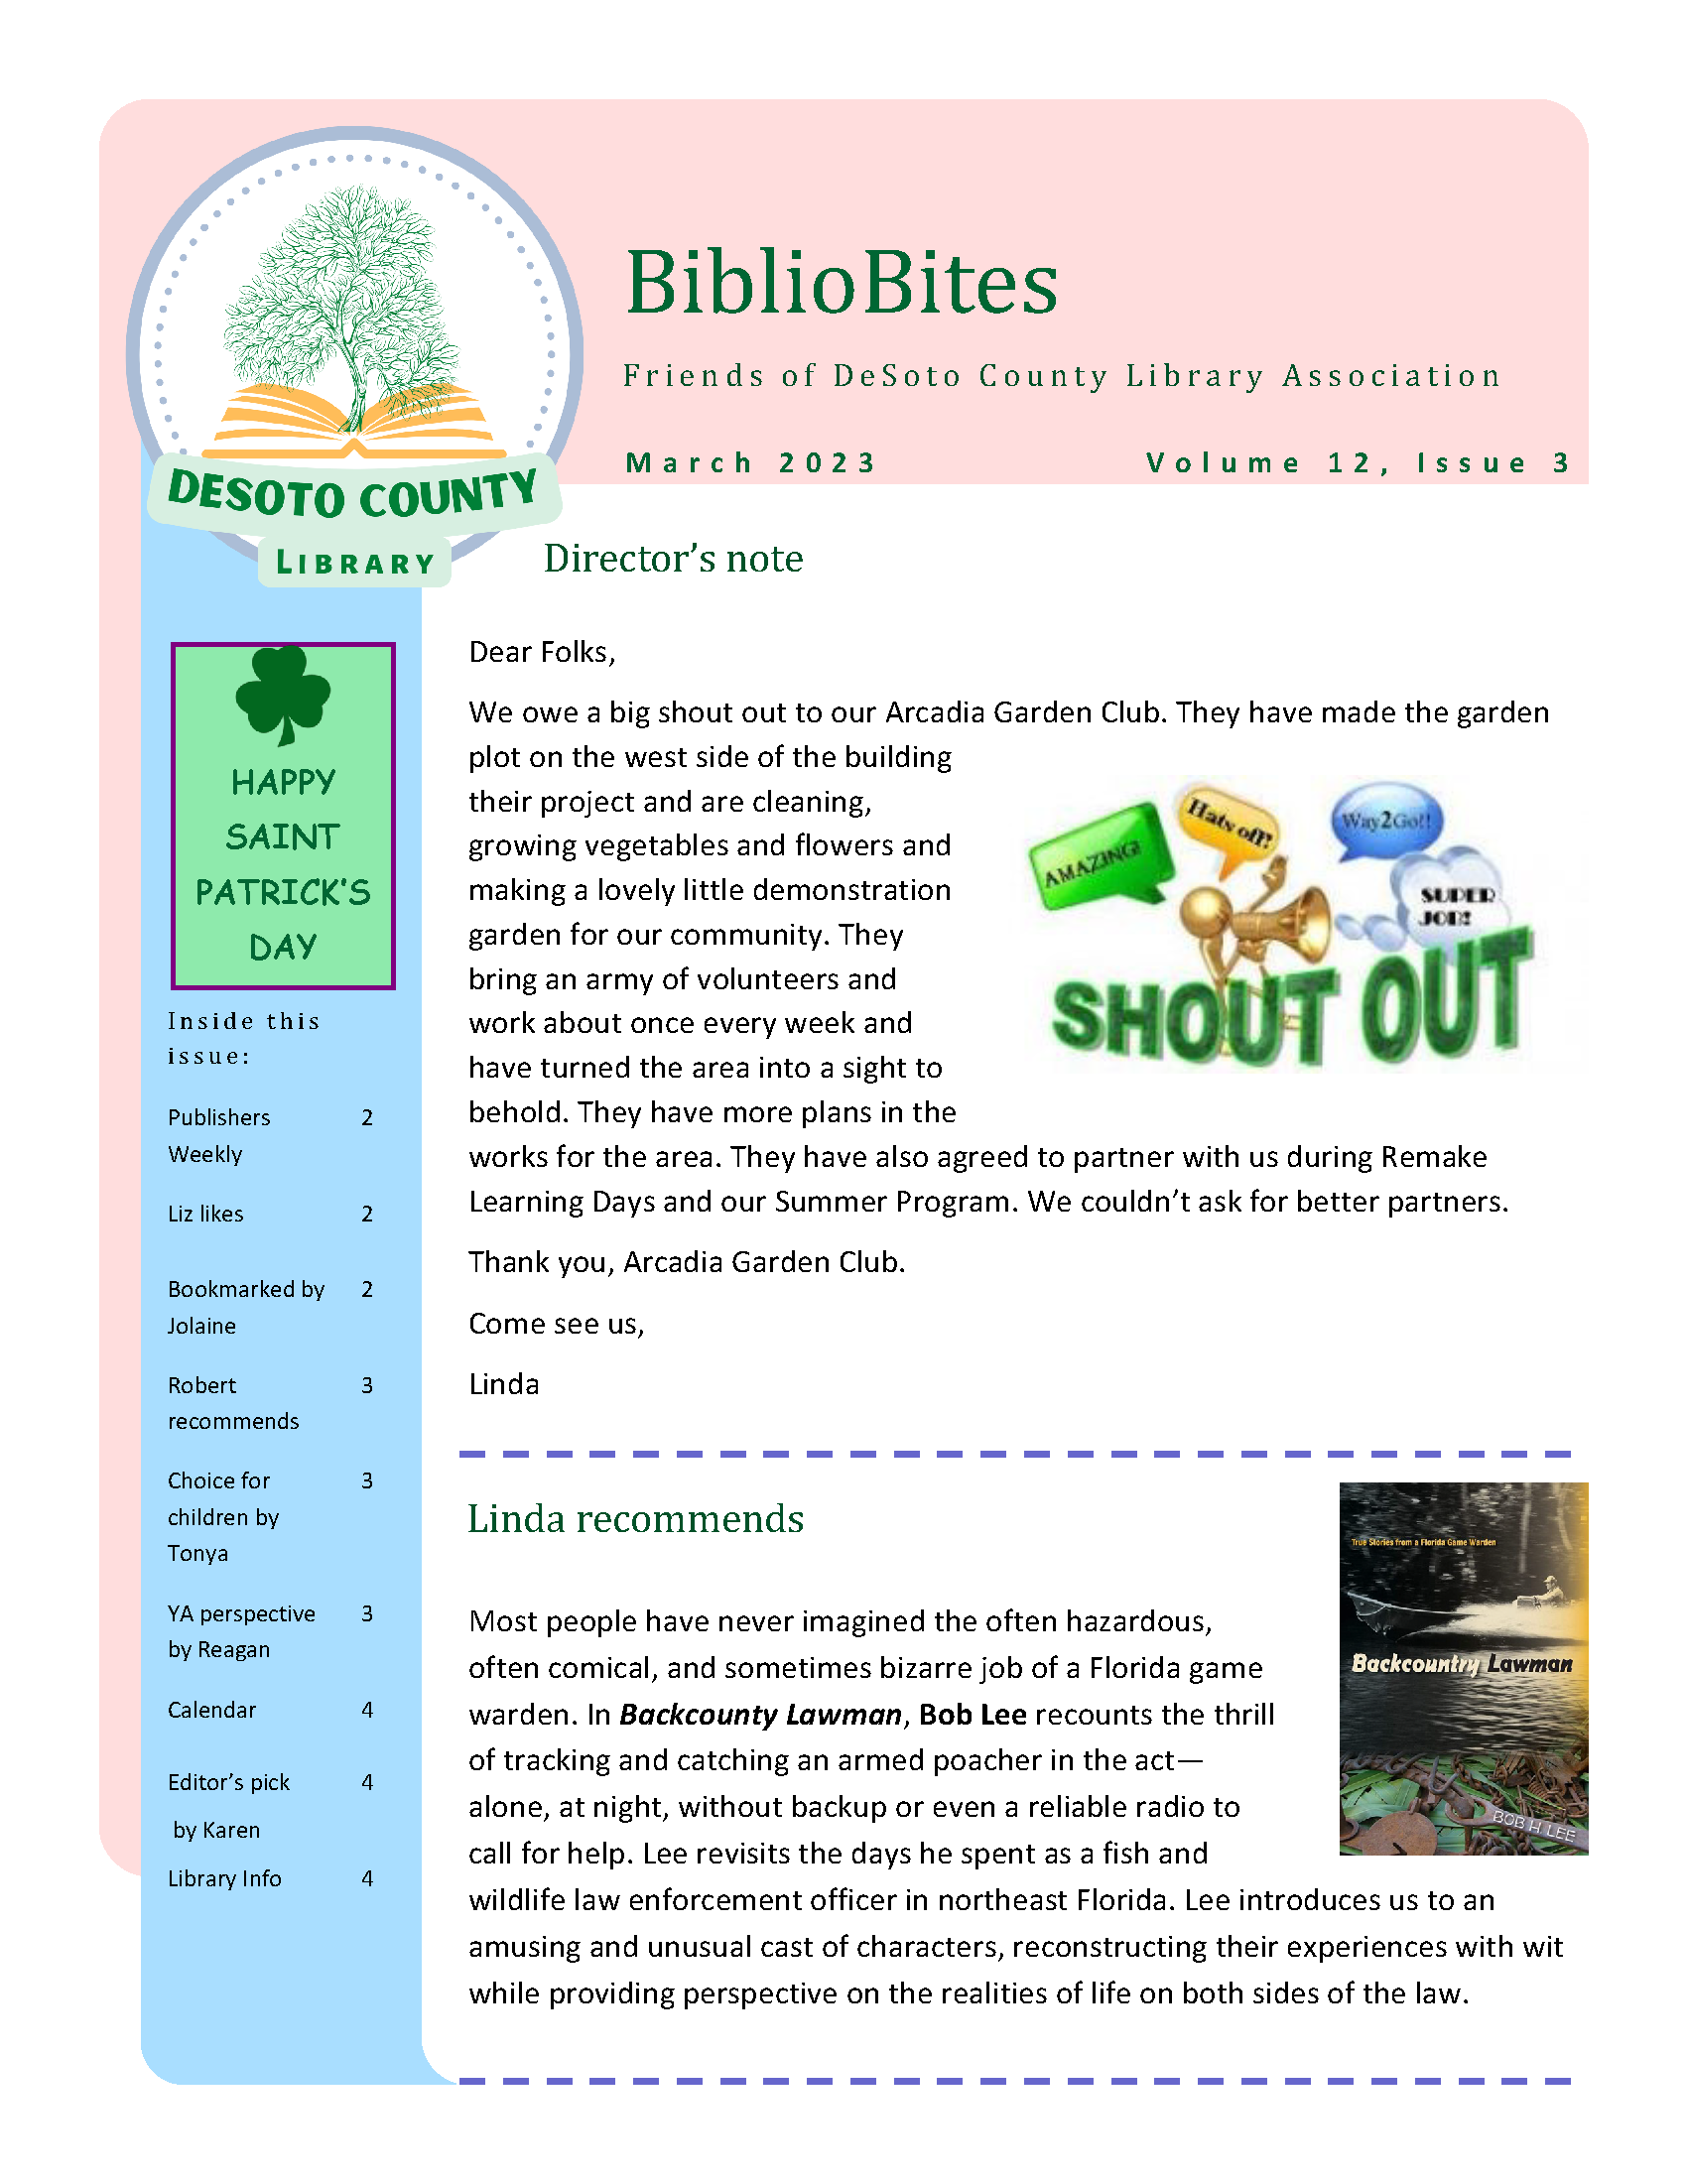 Image of page 1 of the newsletter, available in link as a PDF